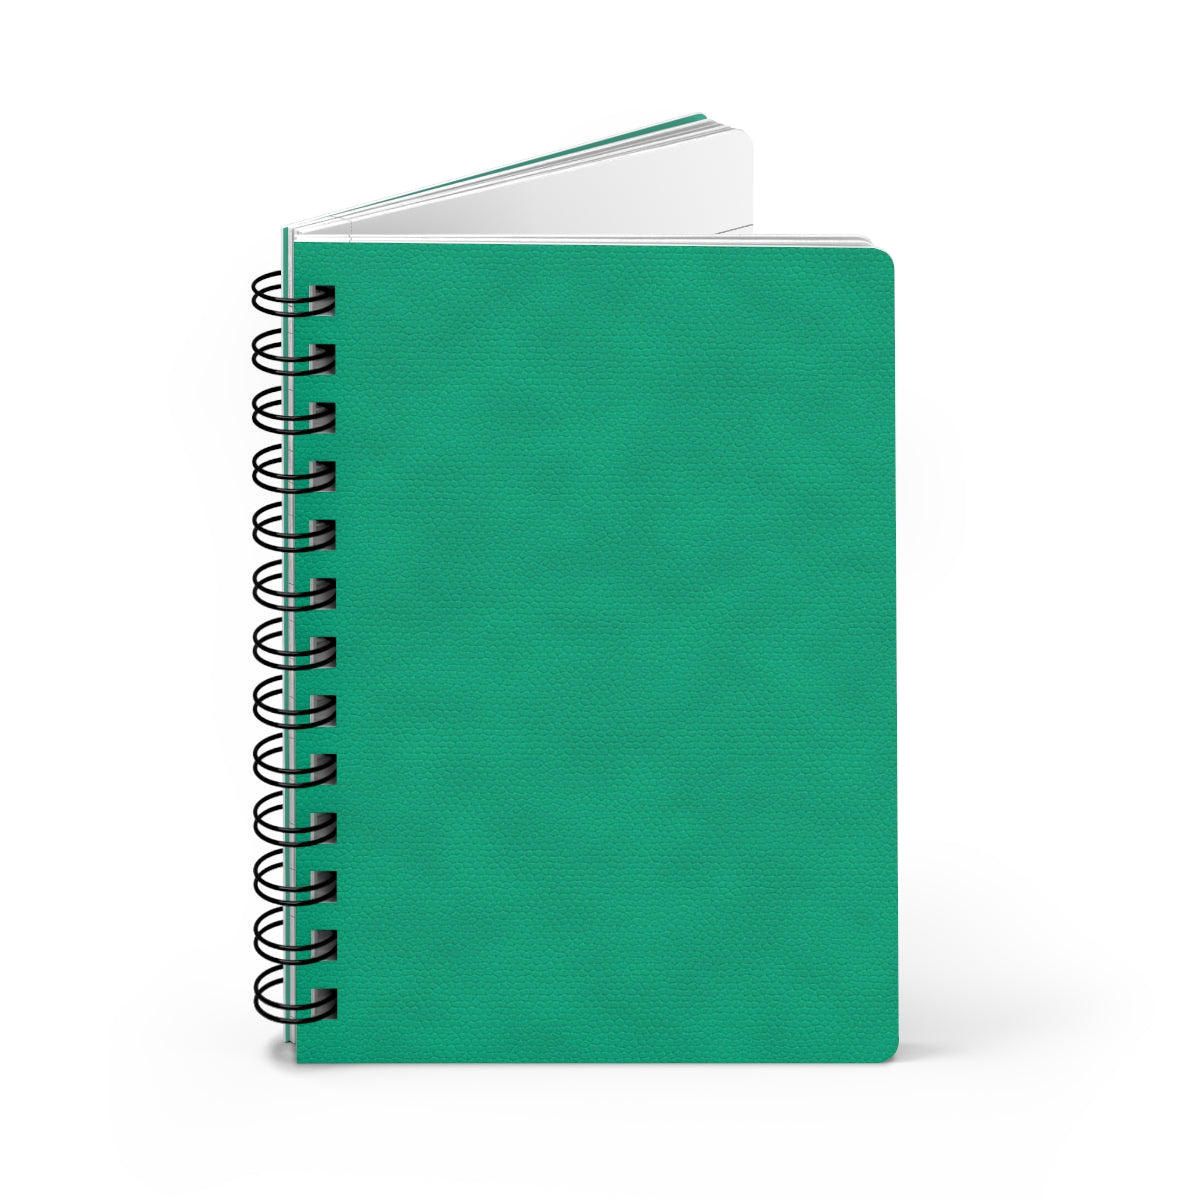 Light Turquoise Leather Print Spiral Bound Journal